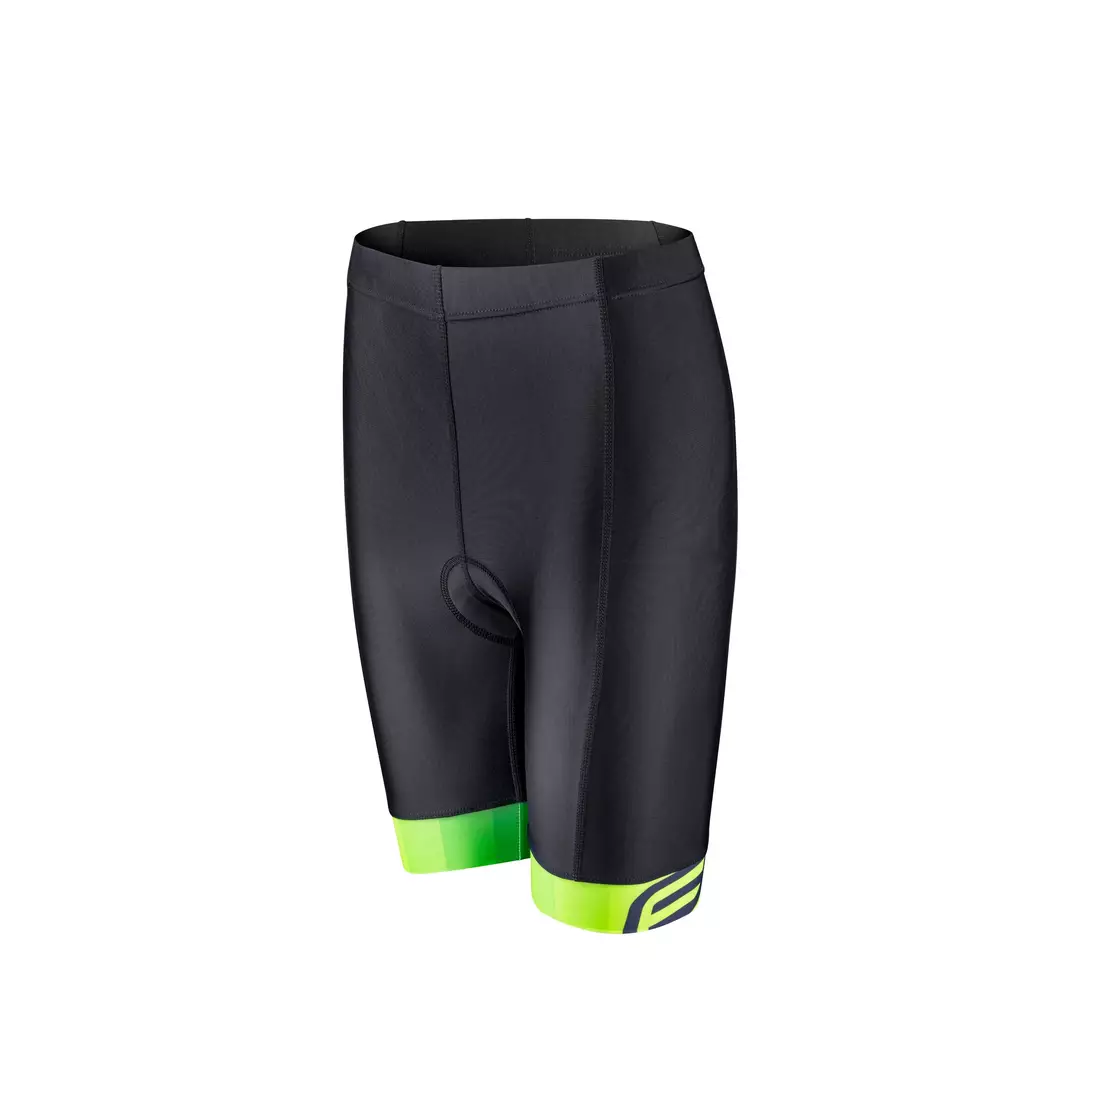 FORCE Children's cycling shorts KID VICTORY, green, 9002536-KID3